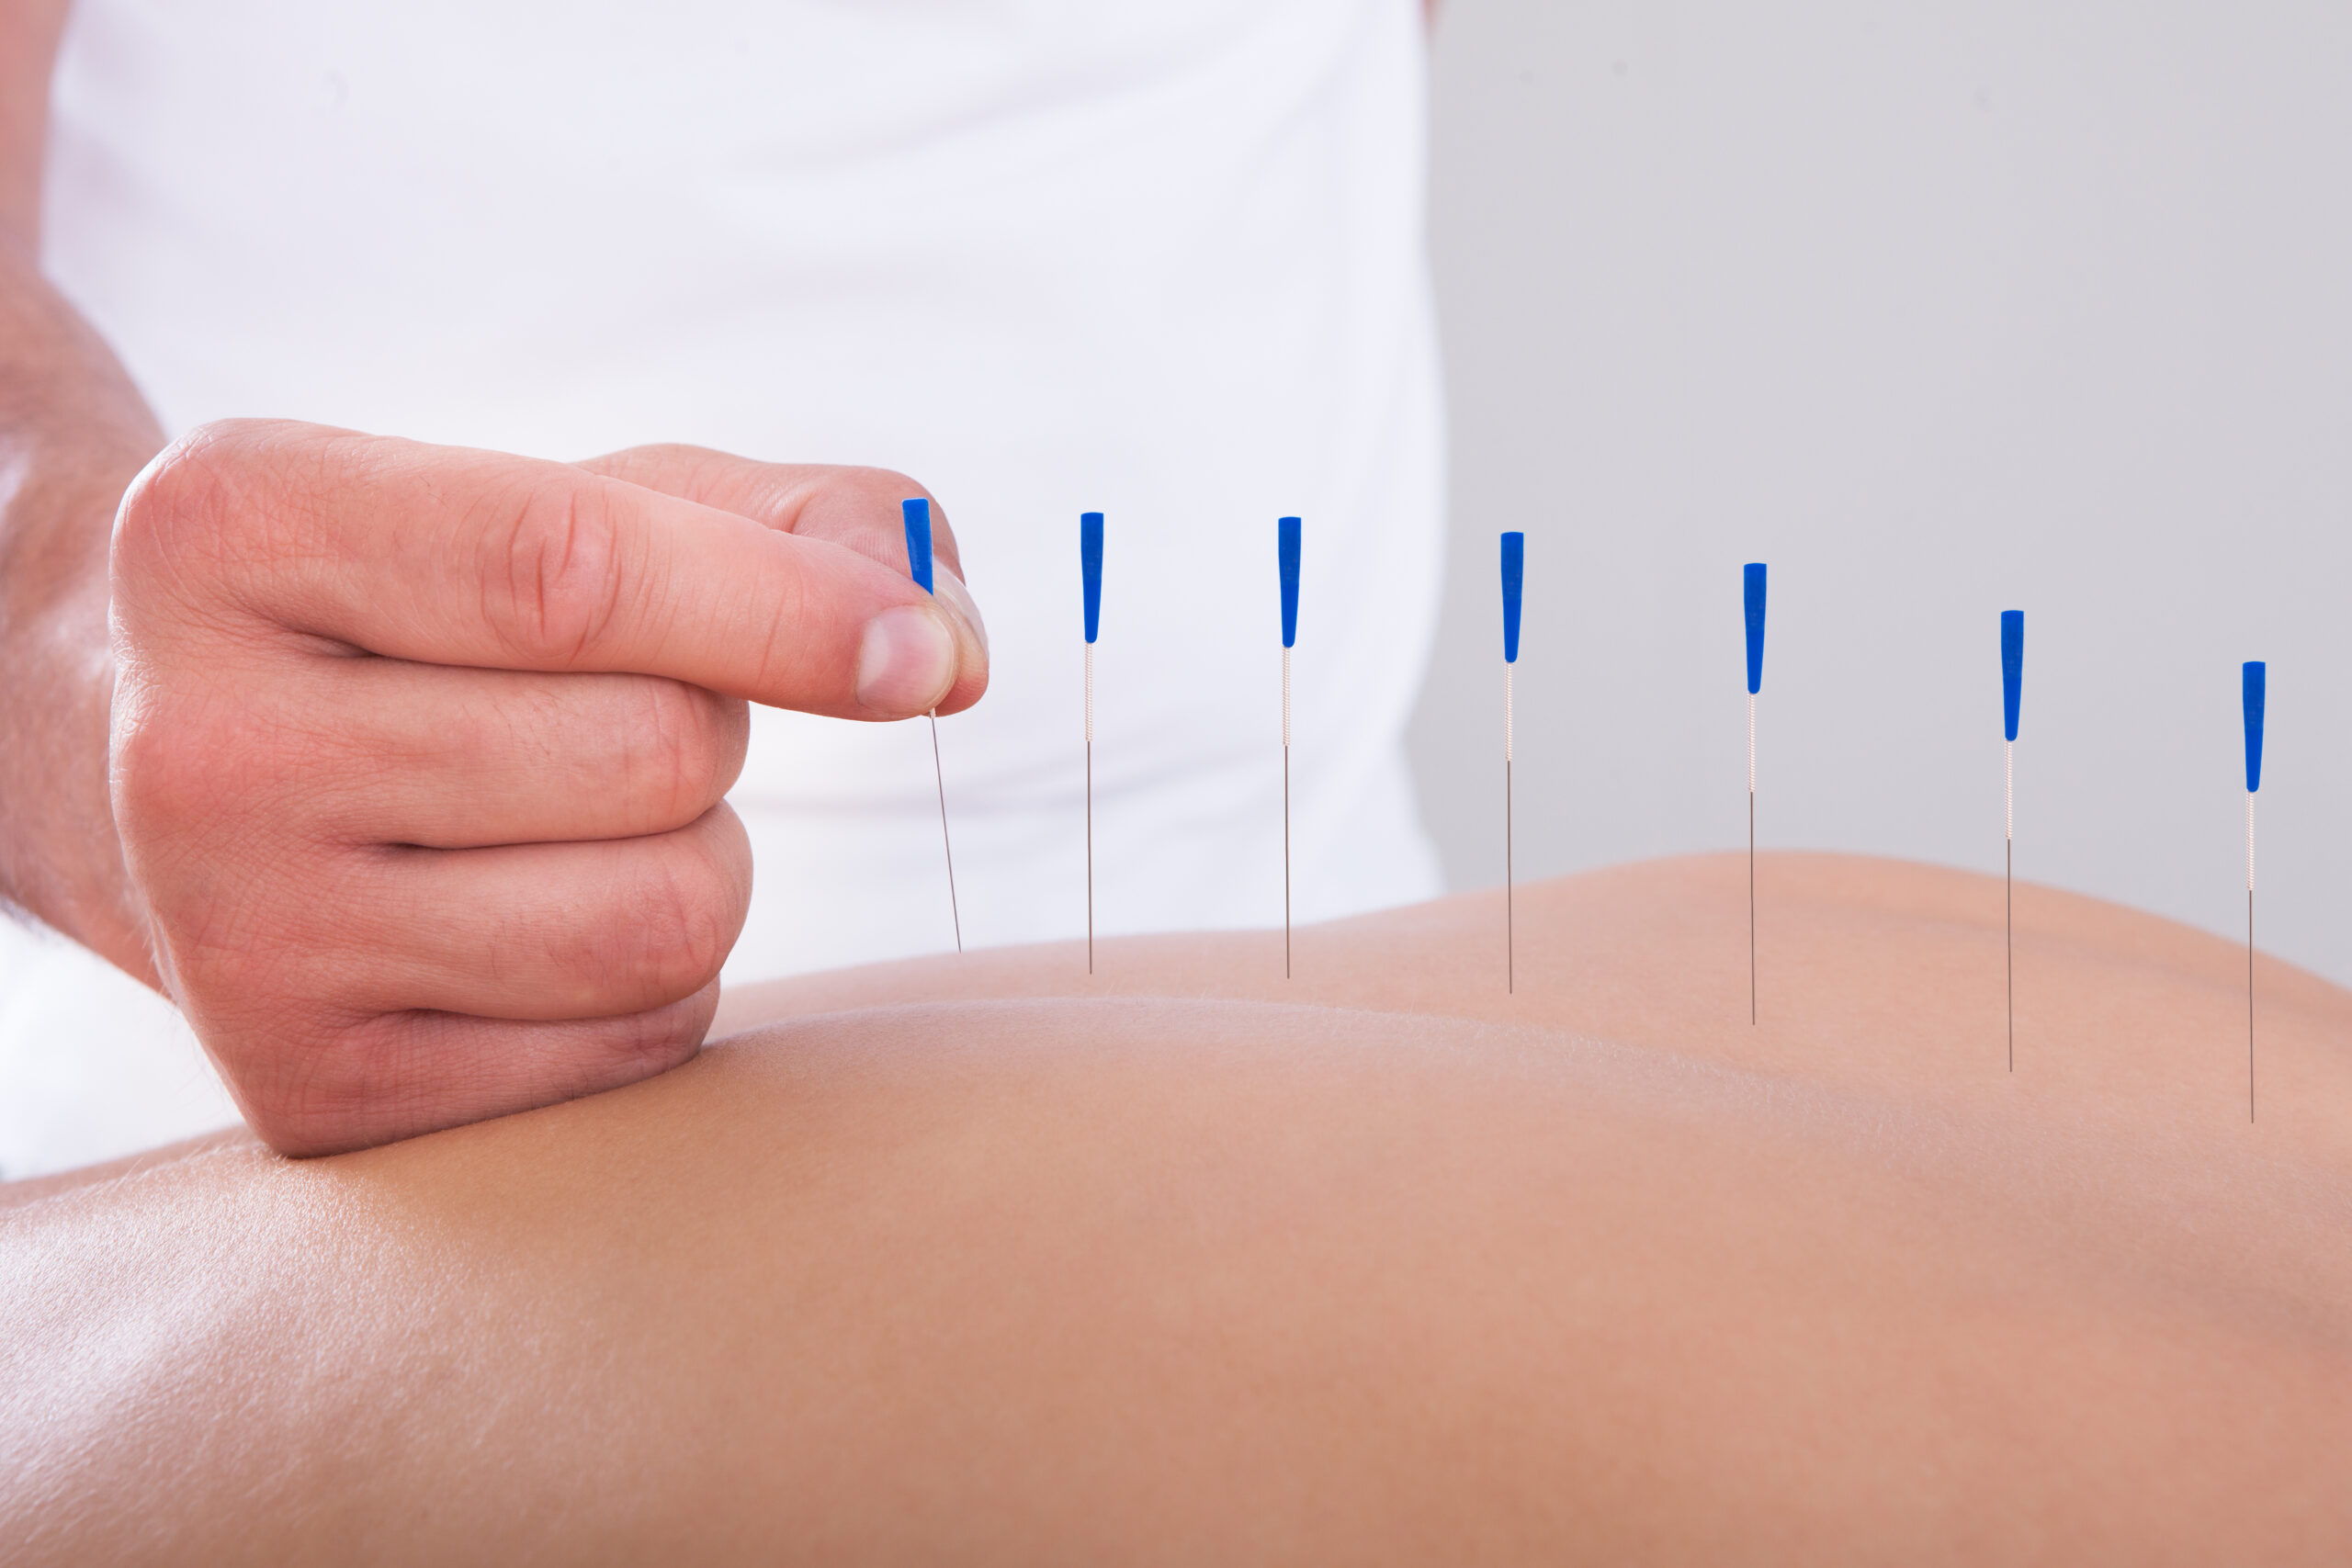 What role can complementary medicine play in managing endometriosis?